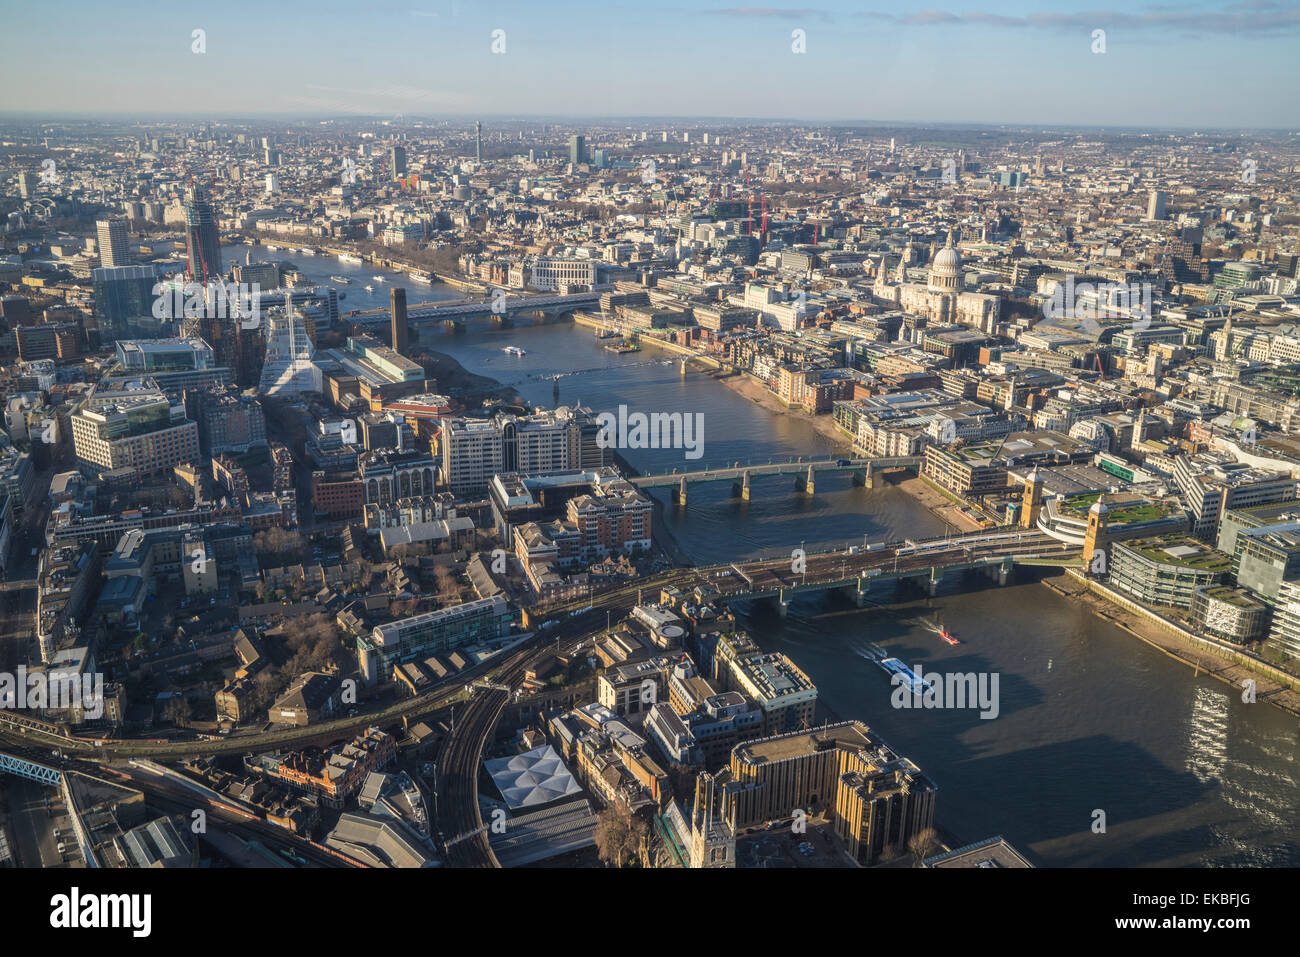 Elevated view of the River Thames and London skyline looking west, London, England, United Kingdom, Europe Stock Photo